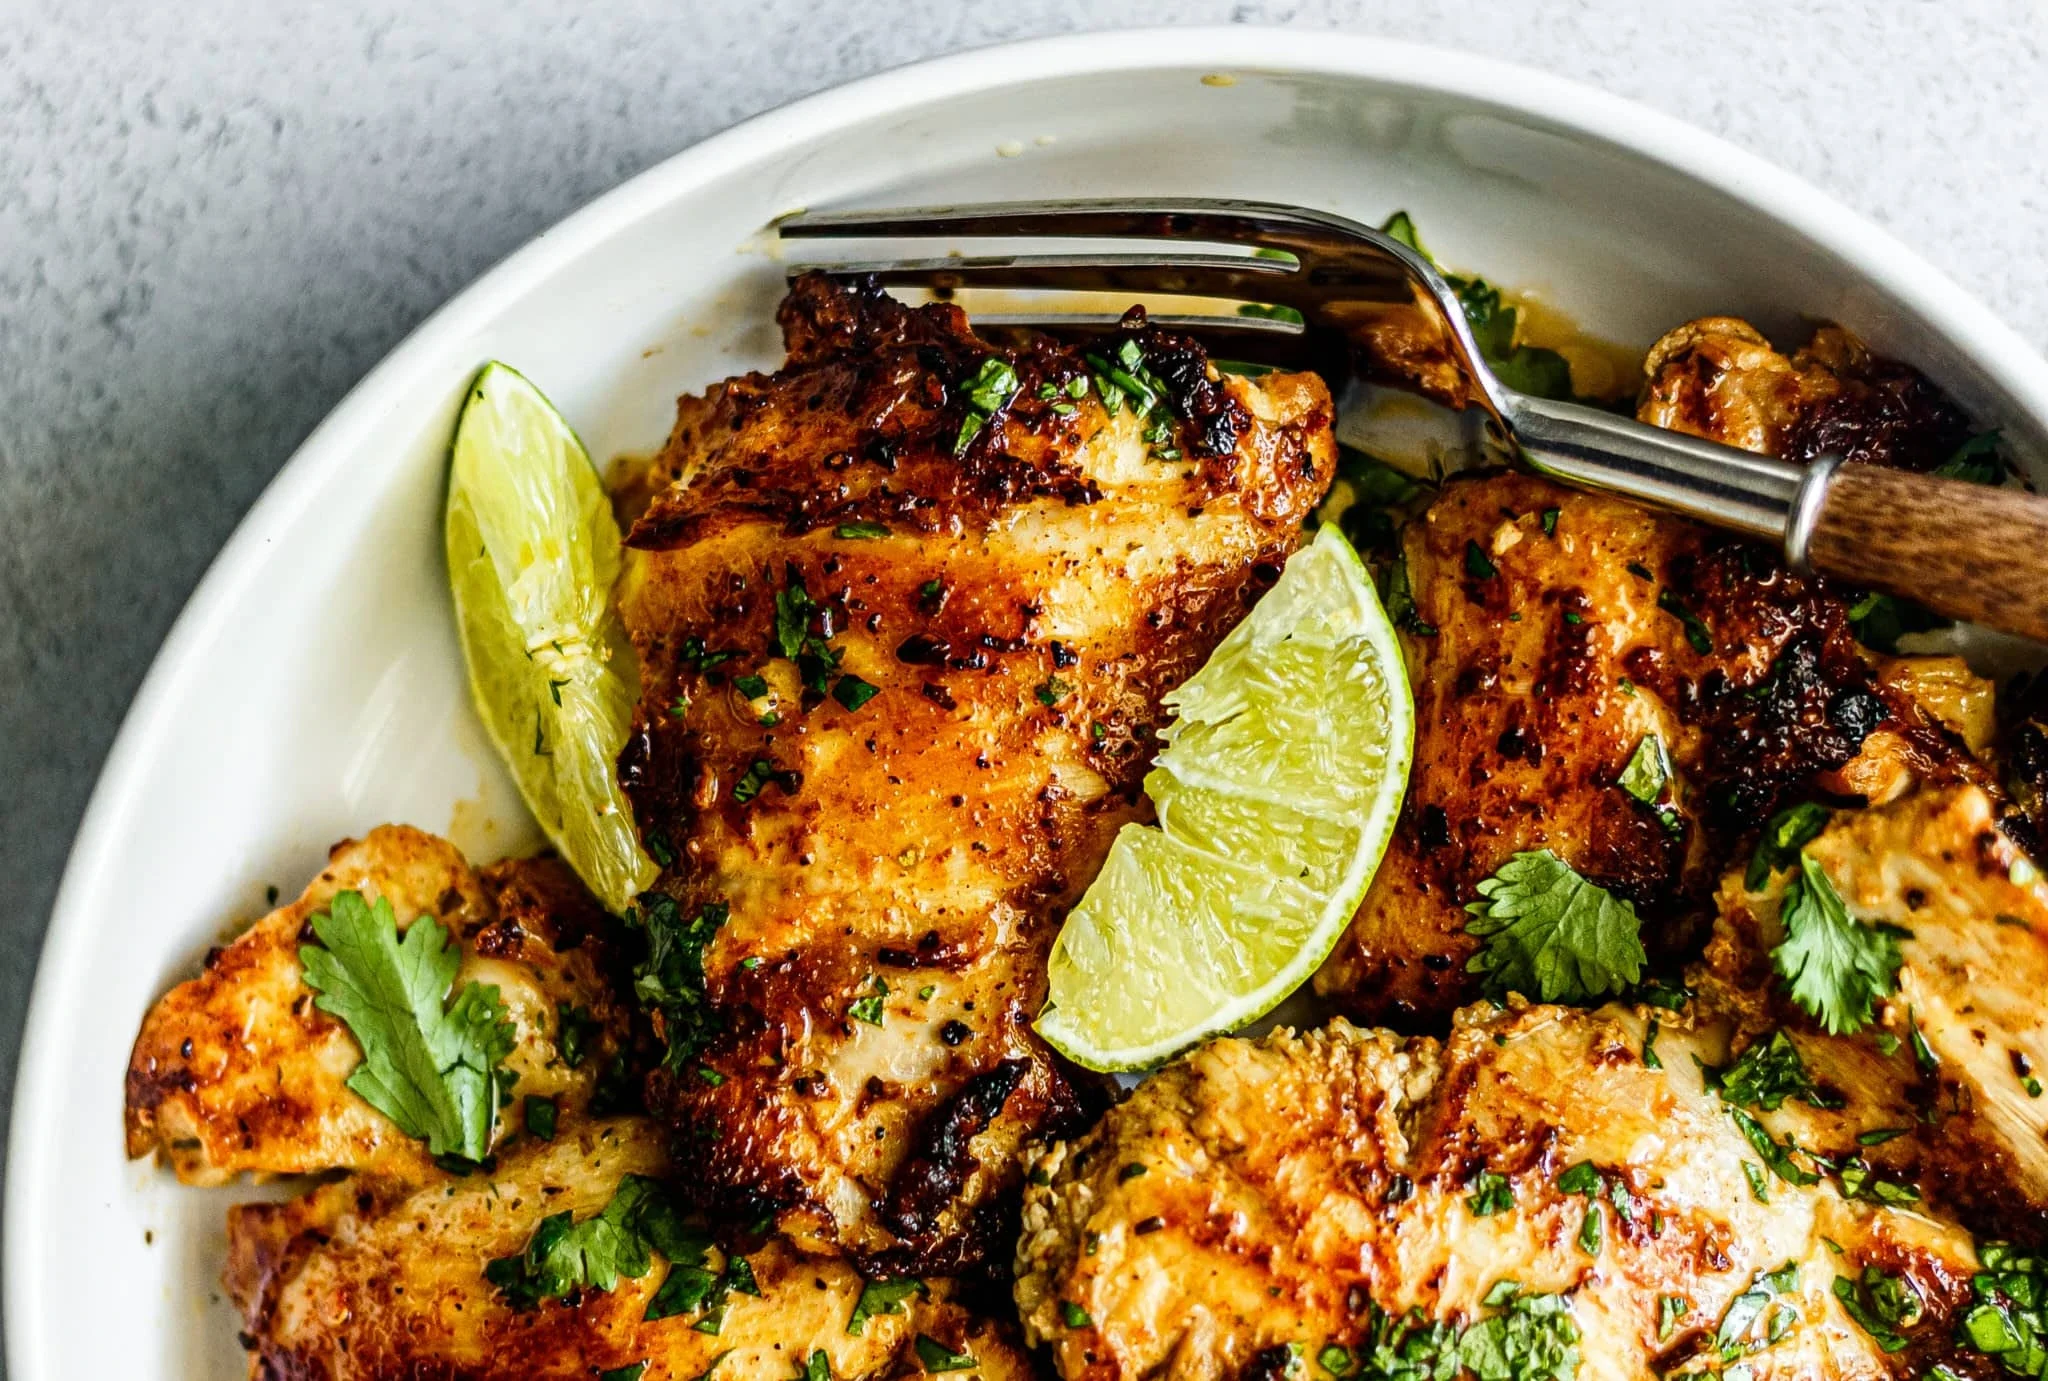 Cilantro-lime chicken thighs